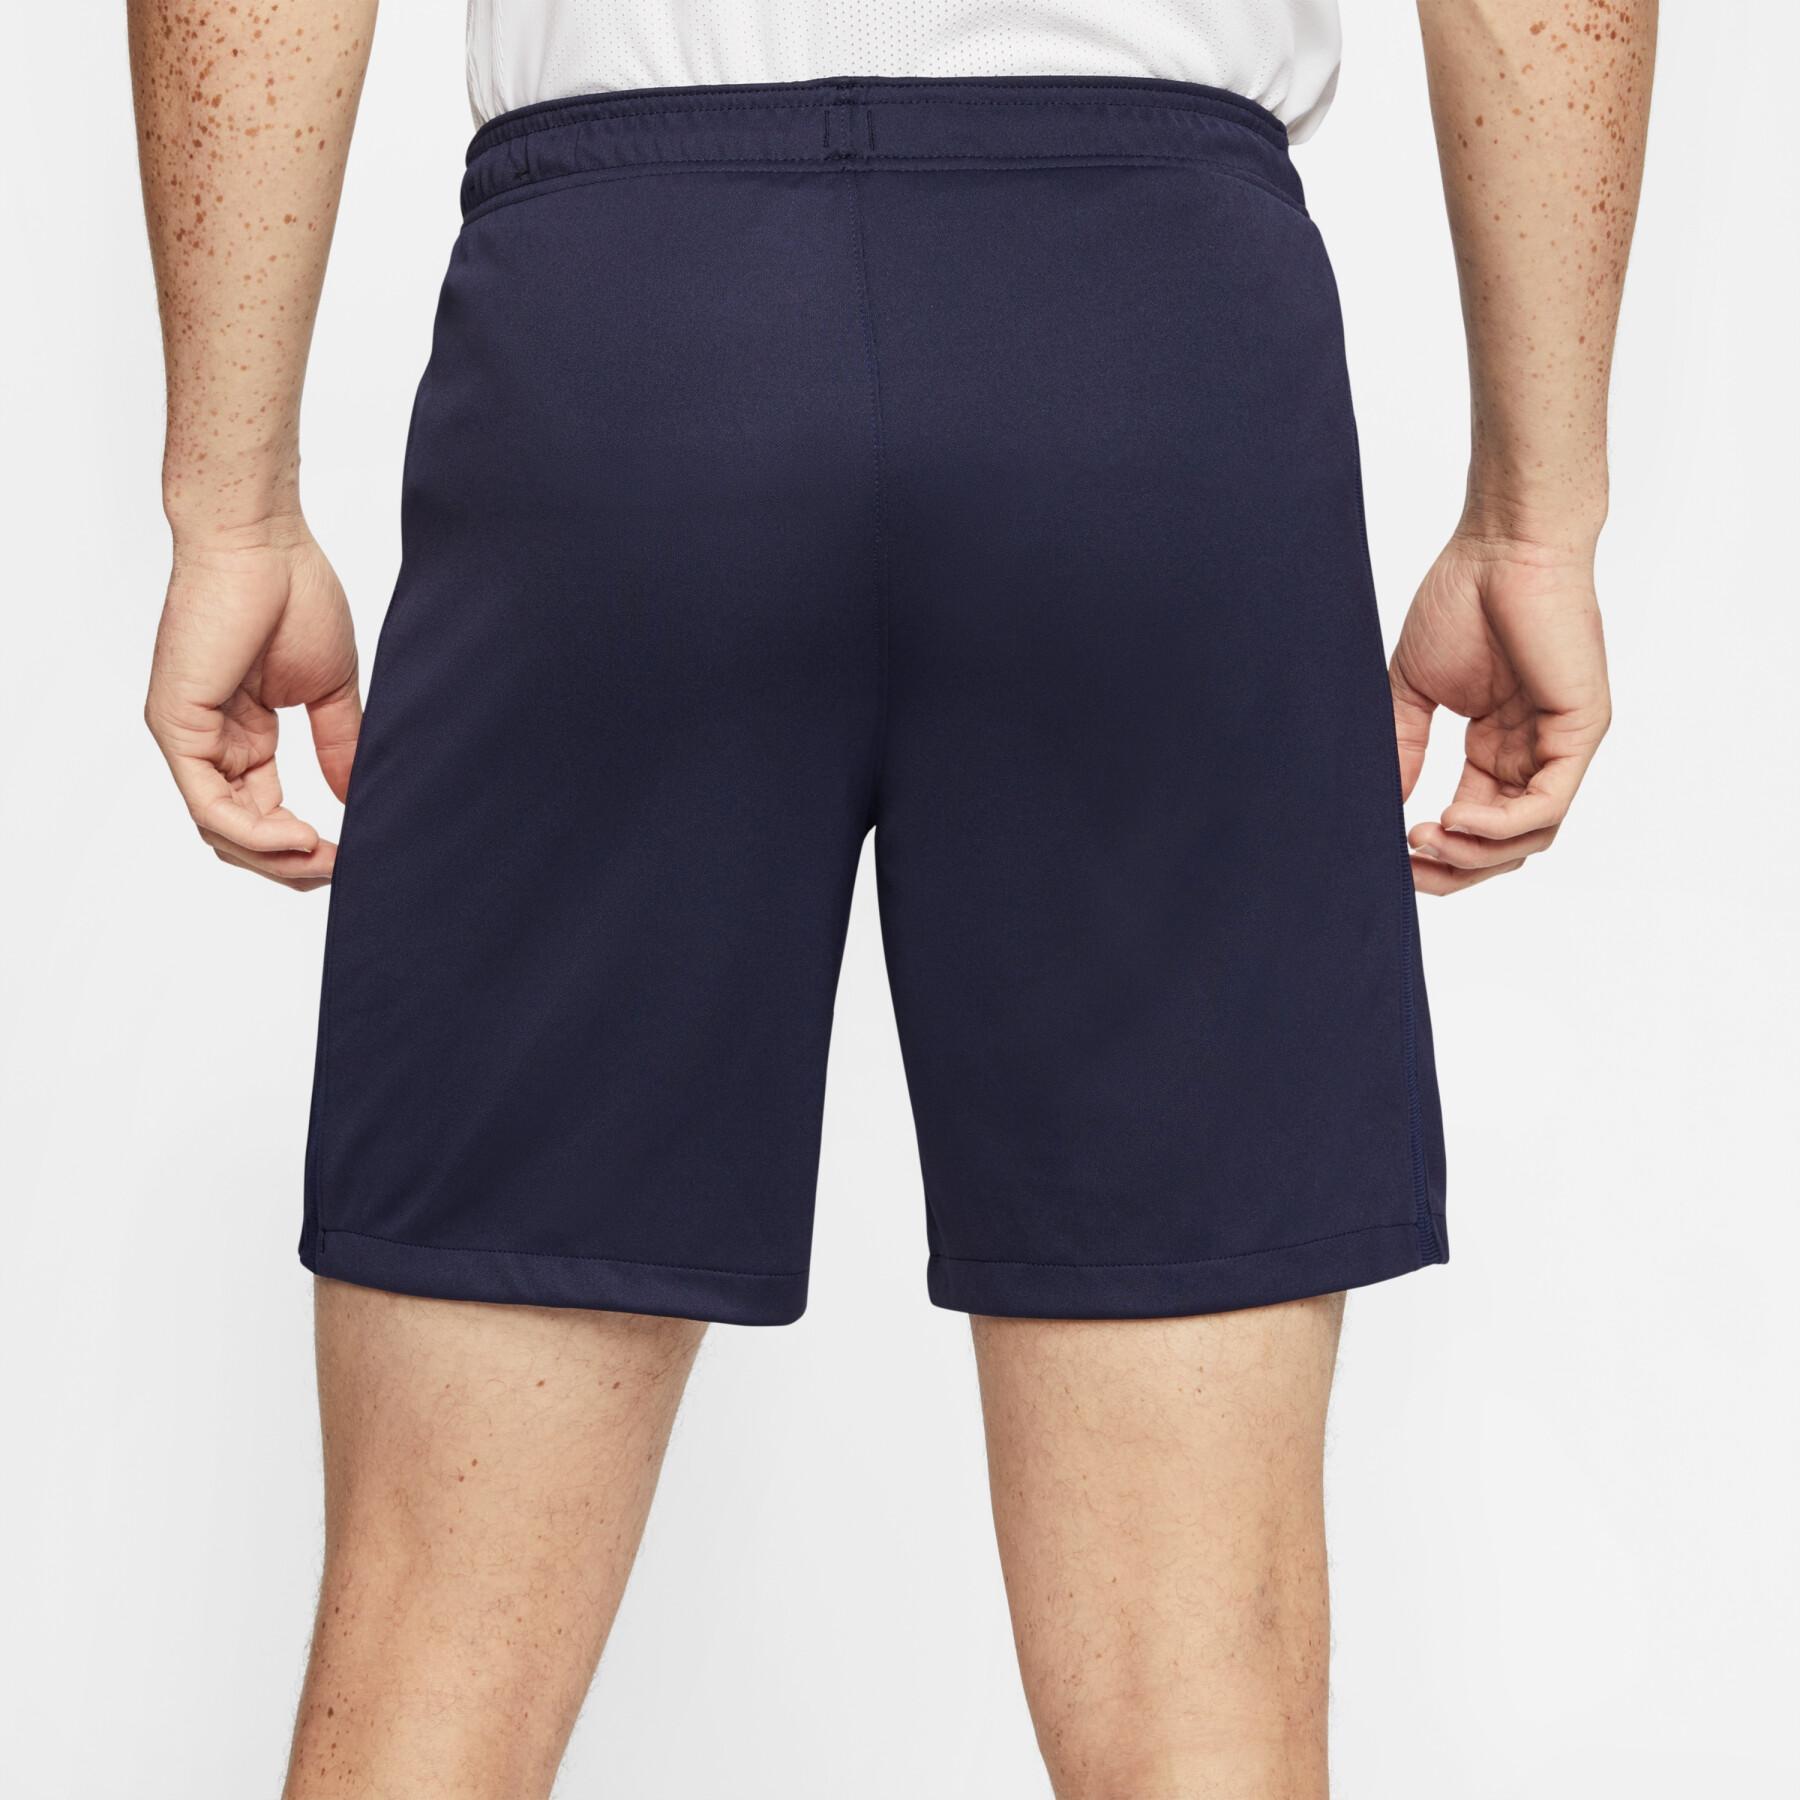 Outdoor shorts France 2020